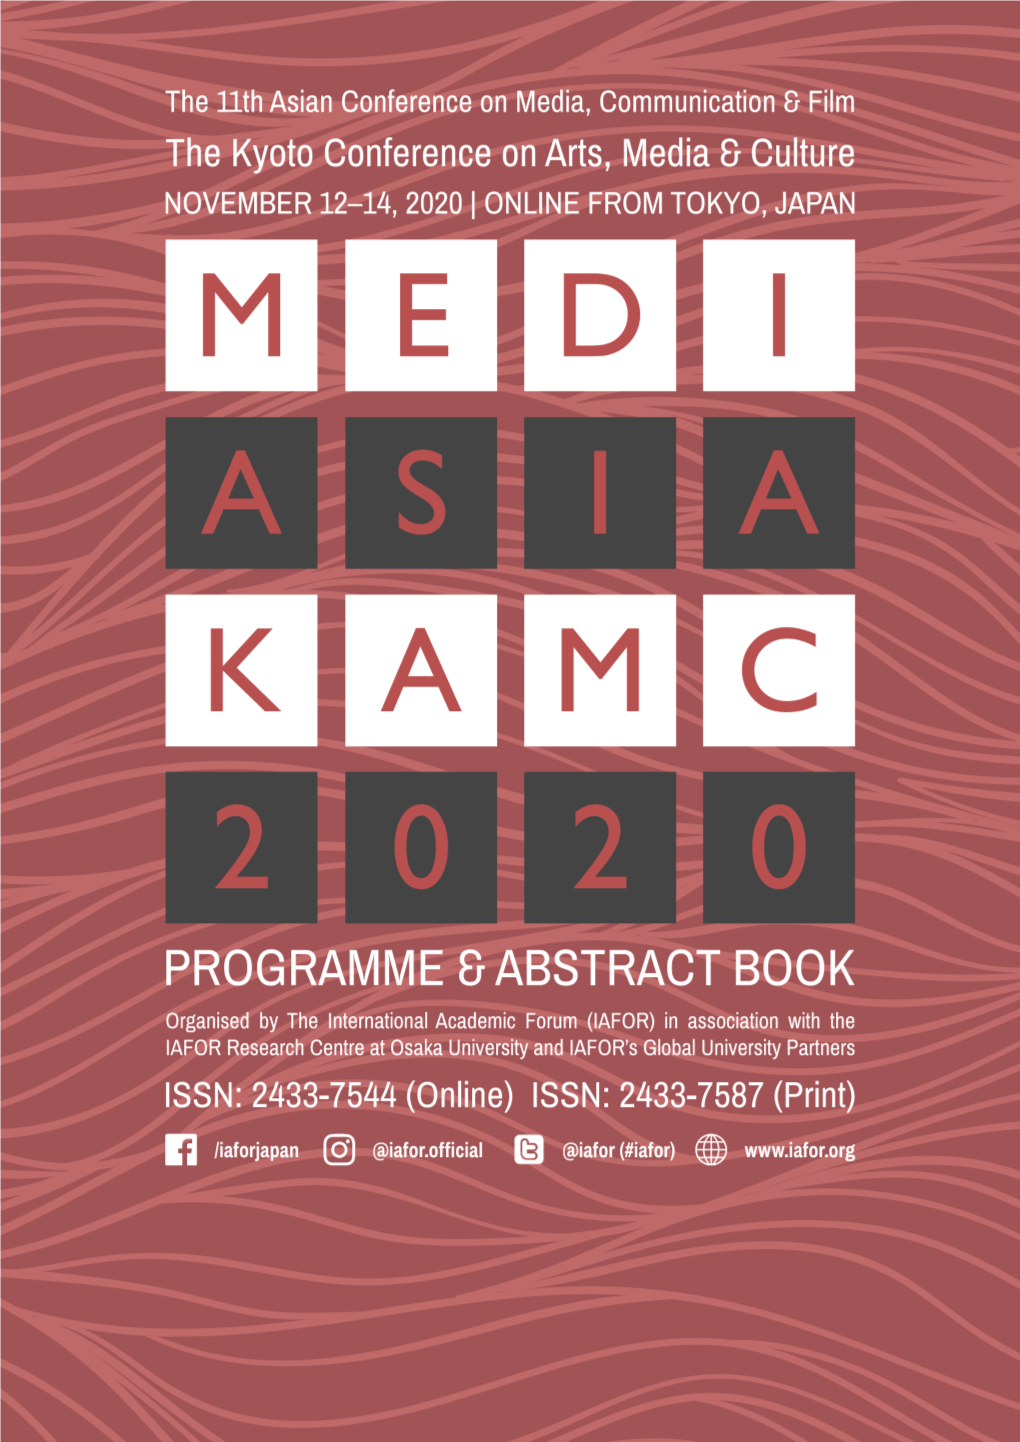 Mediasia / KAMC2020 Conference Programme & Abstract Book